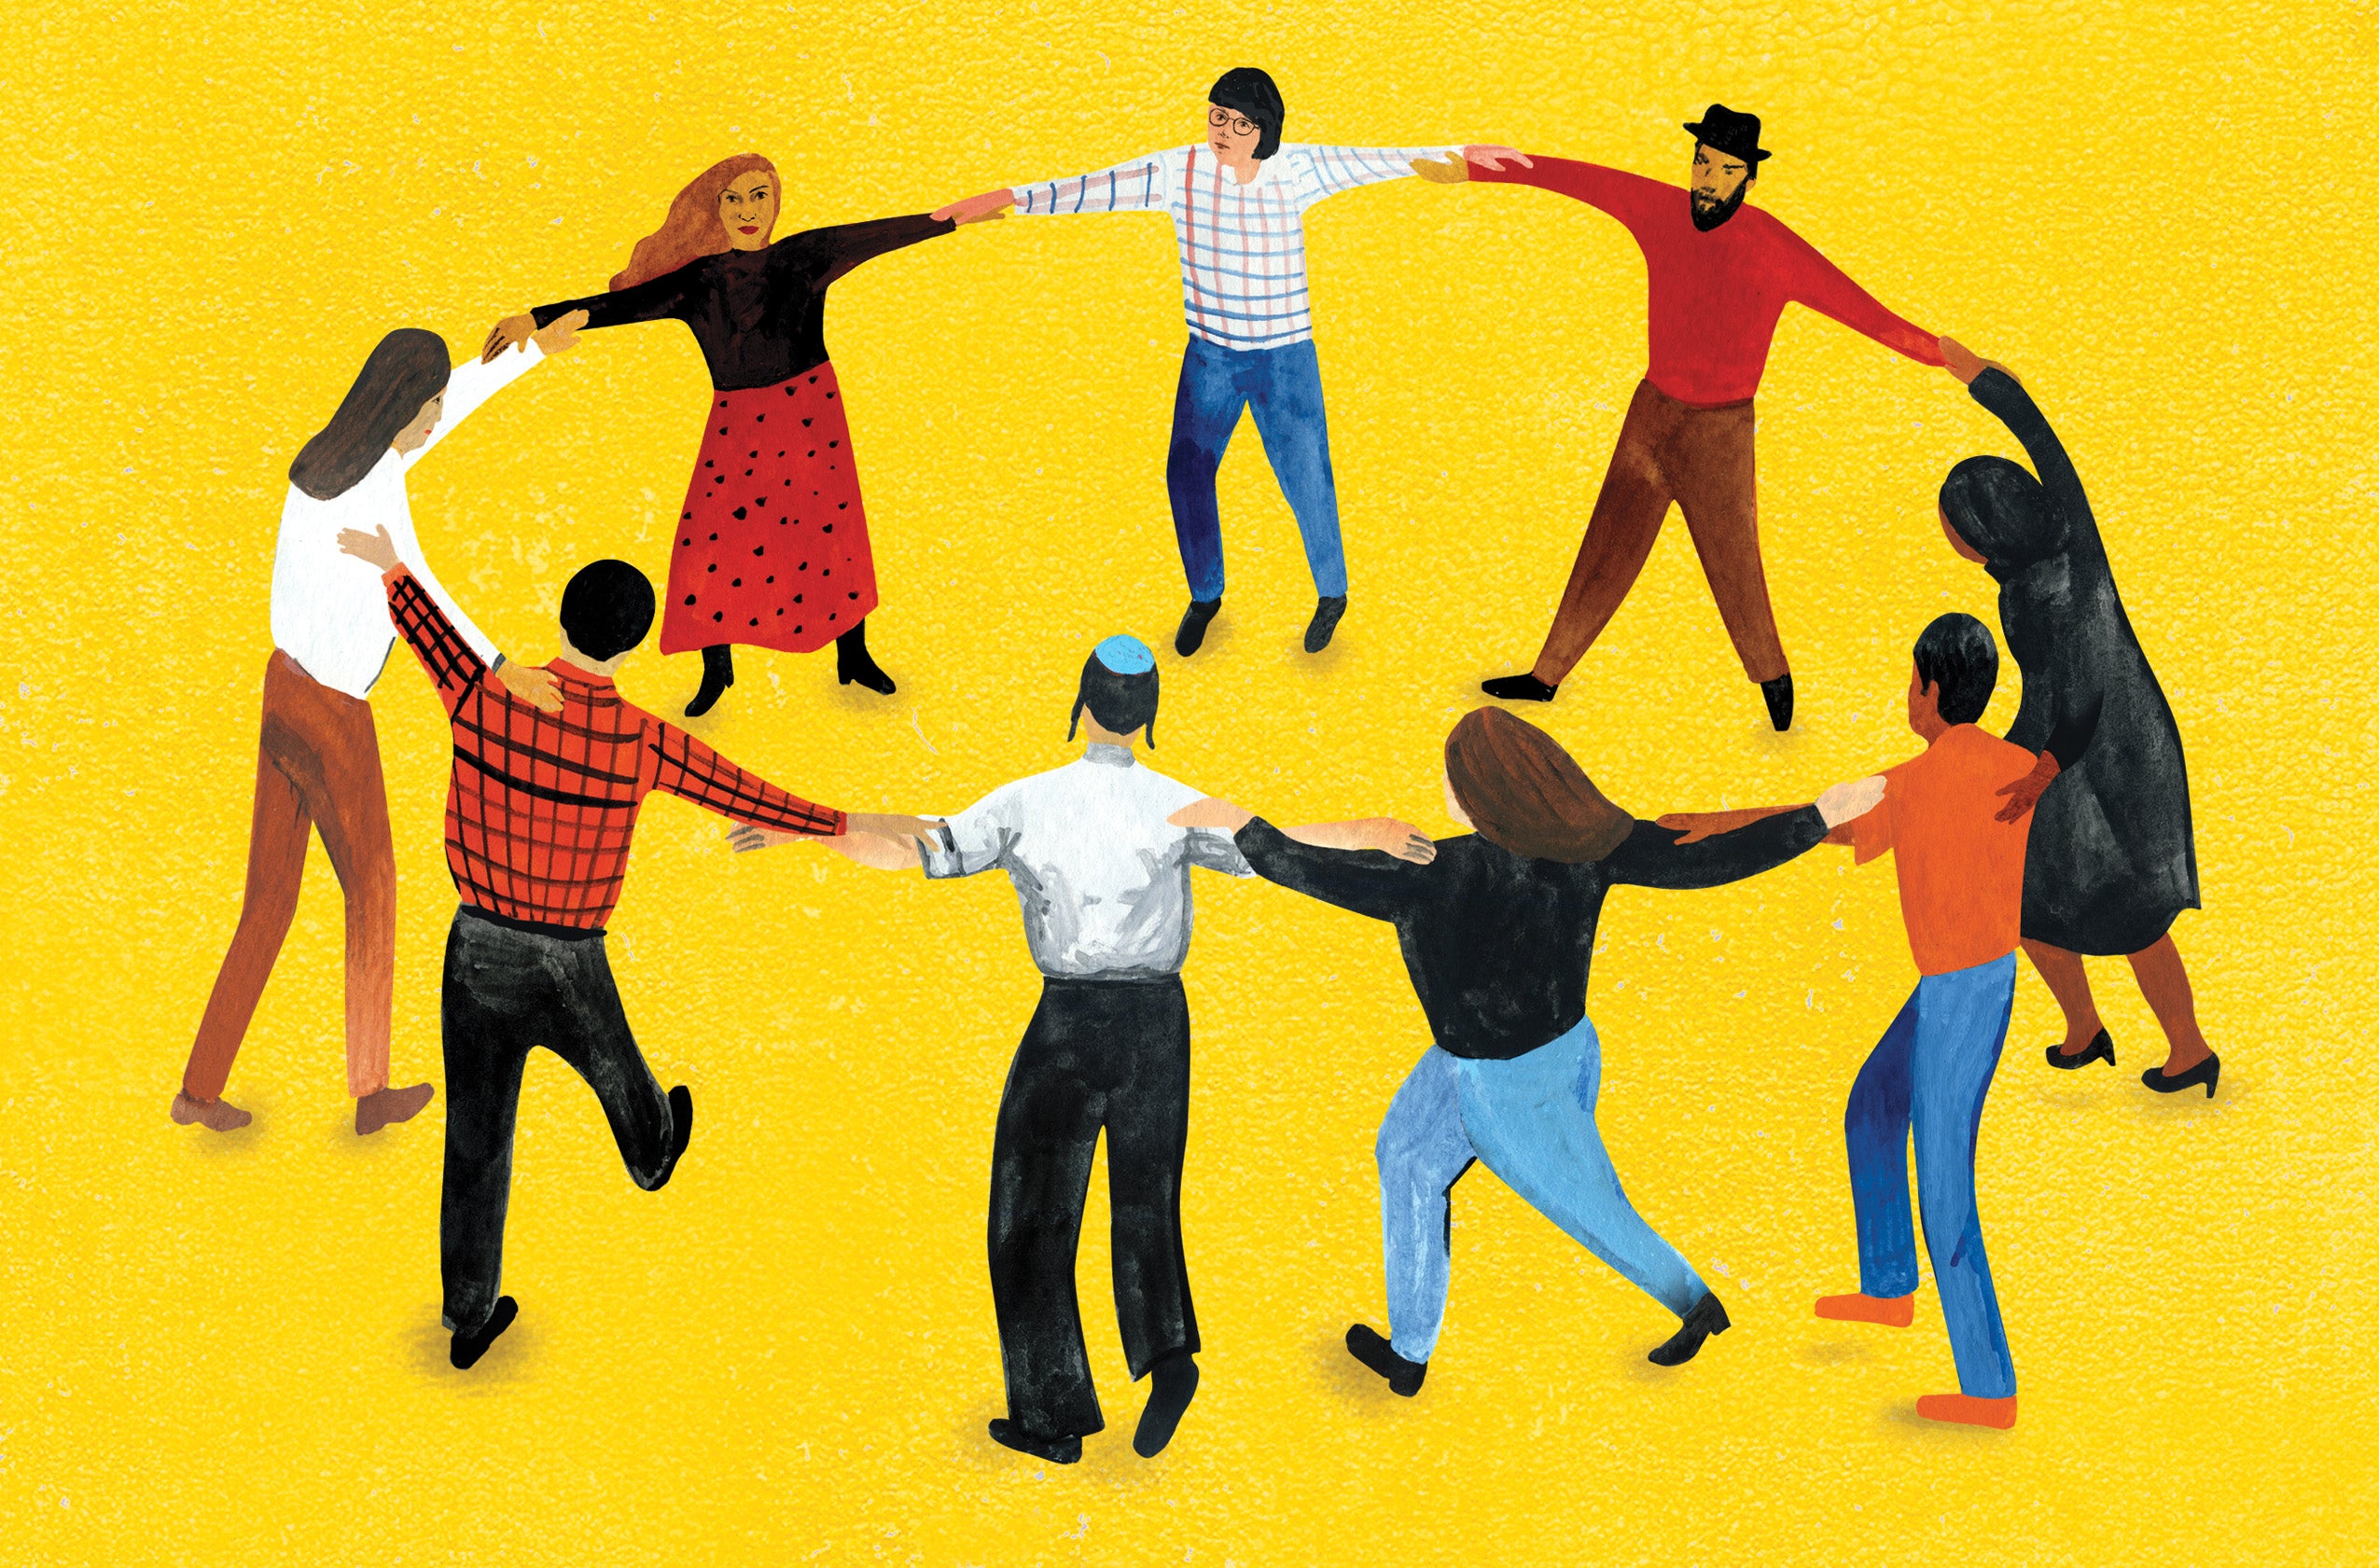 Illustration of different people dancing in a circle